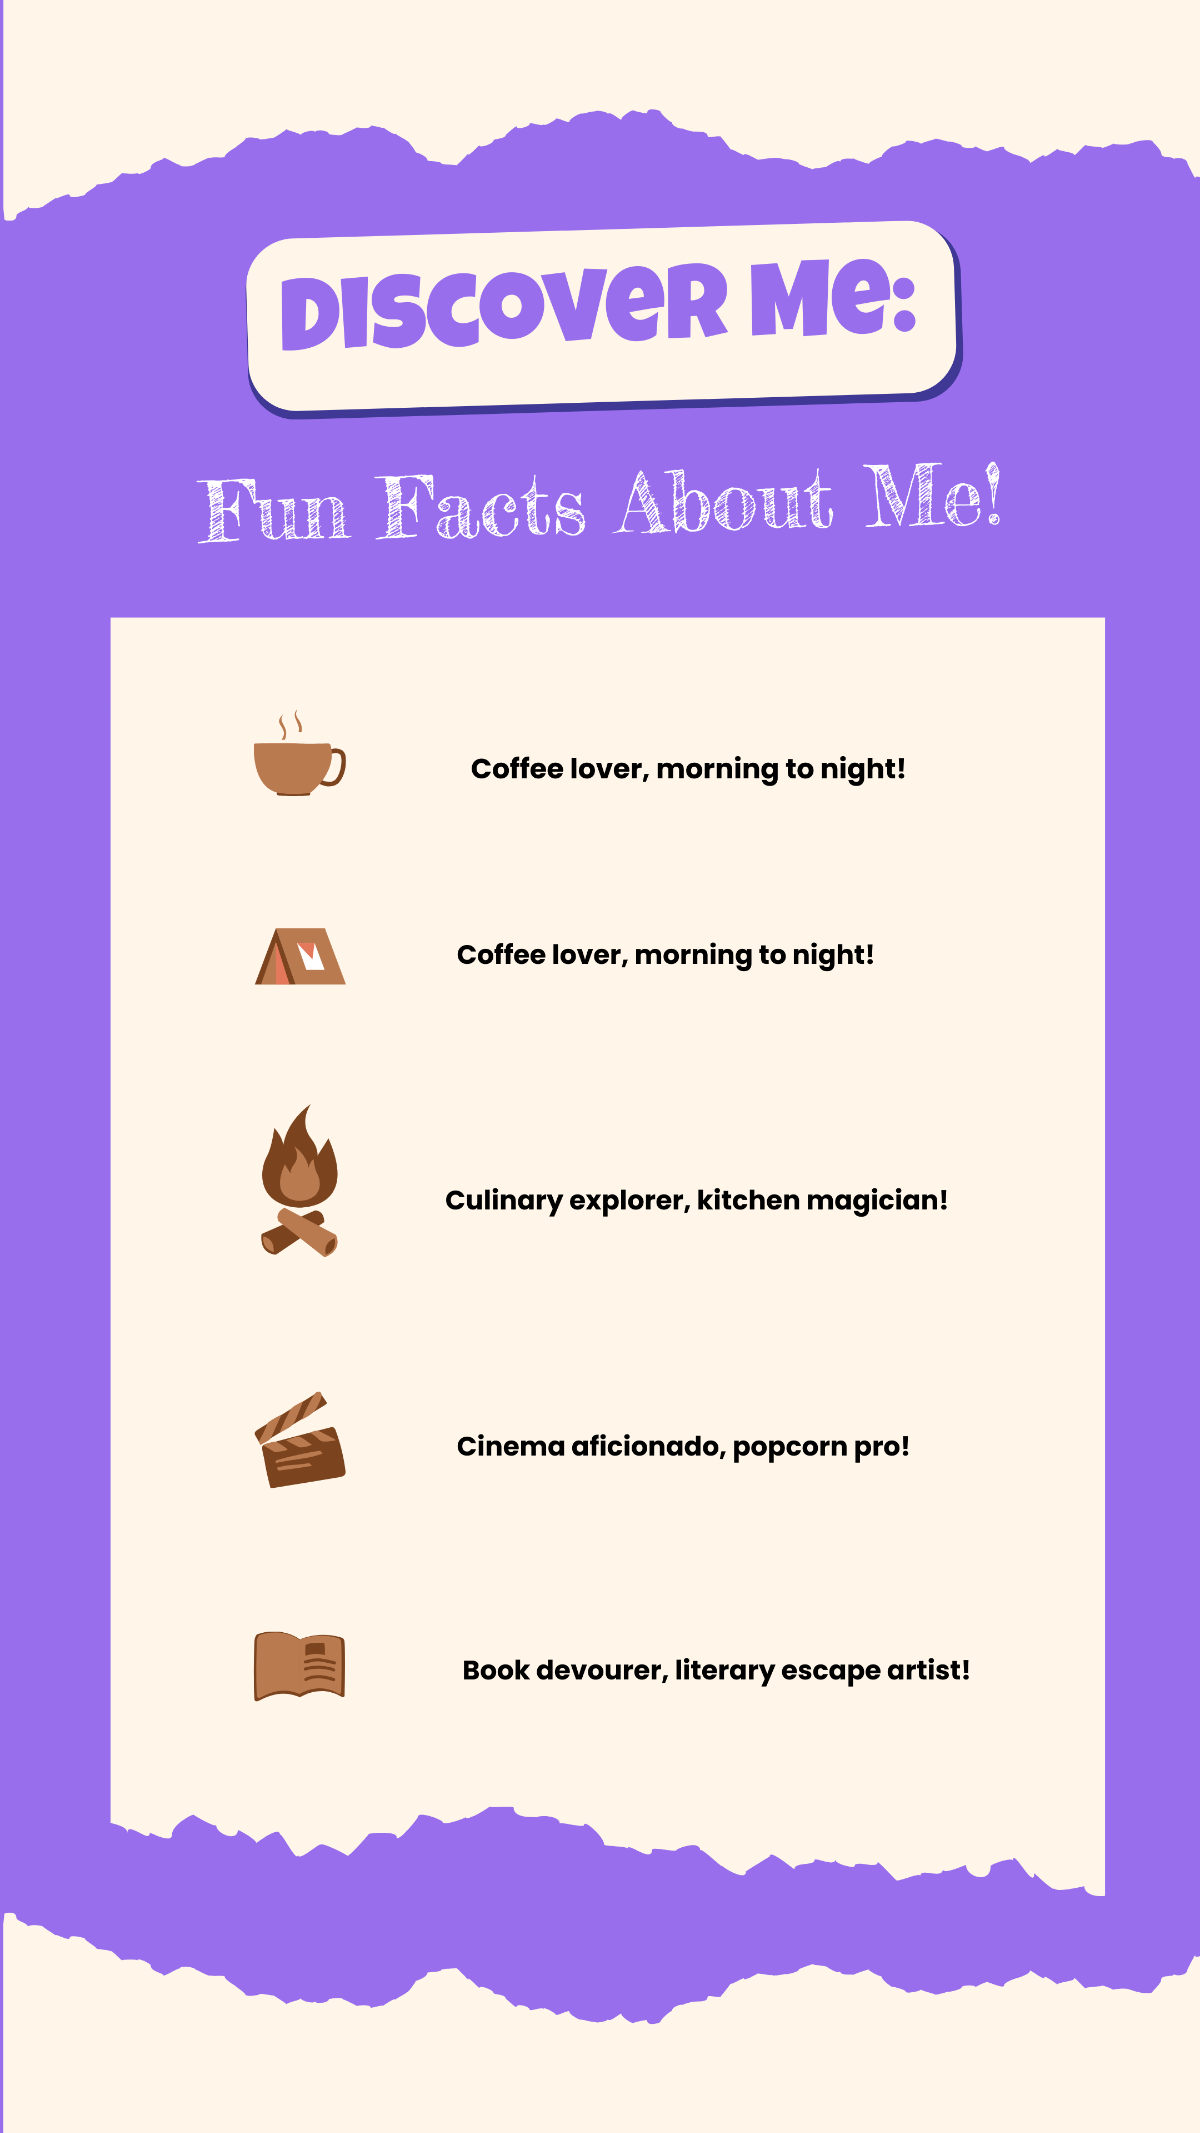 Free Get to Know Me Fun Facts About Me IG Post